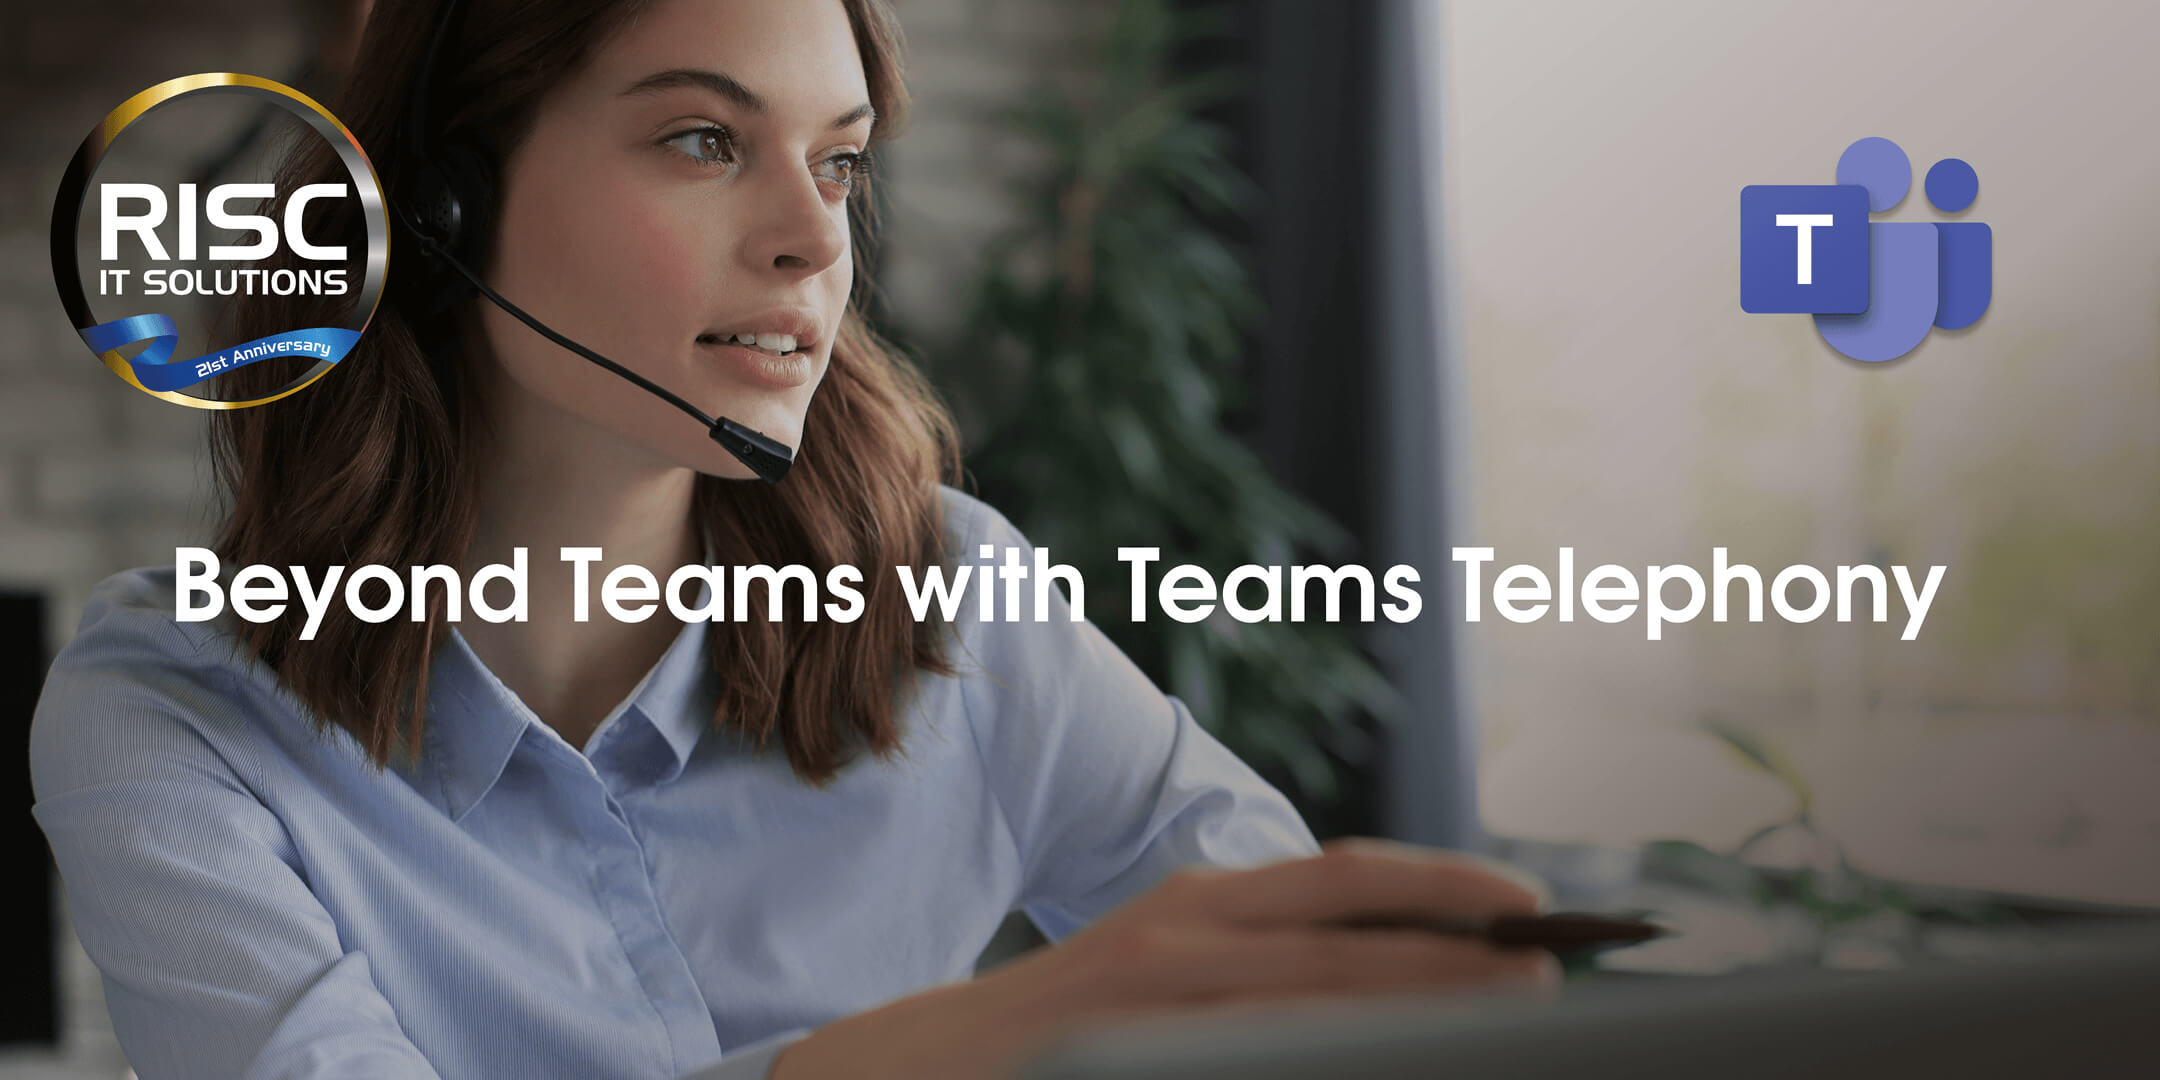 Risc IT Solutions Webinars - Beyond Teams with Teams Telephony